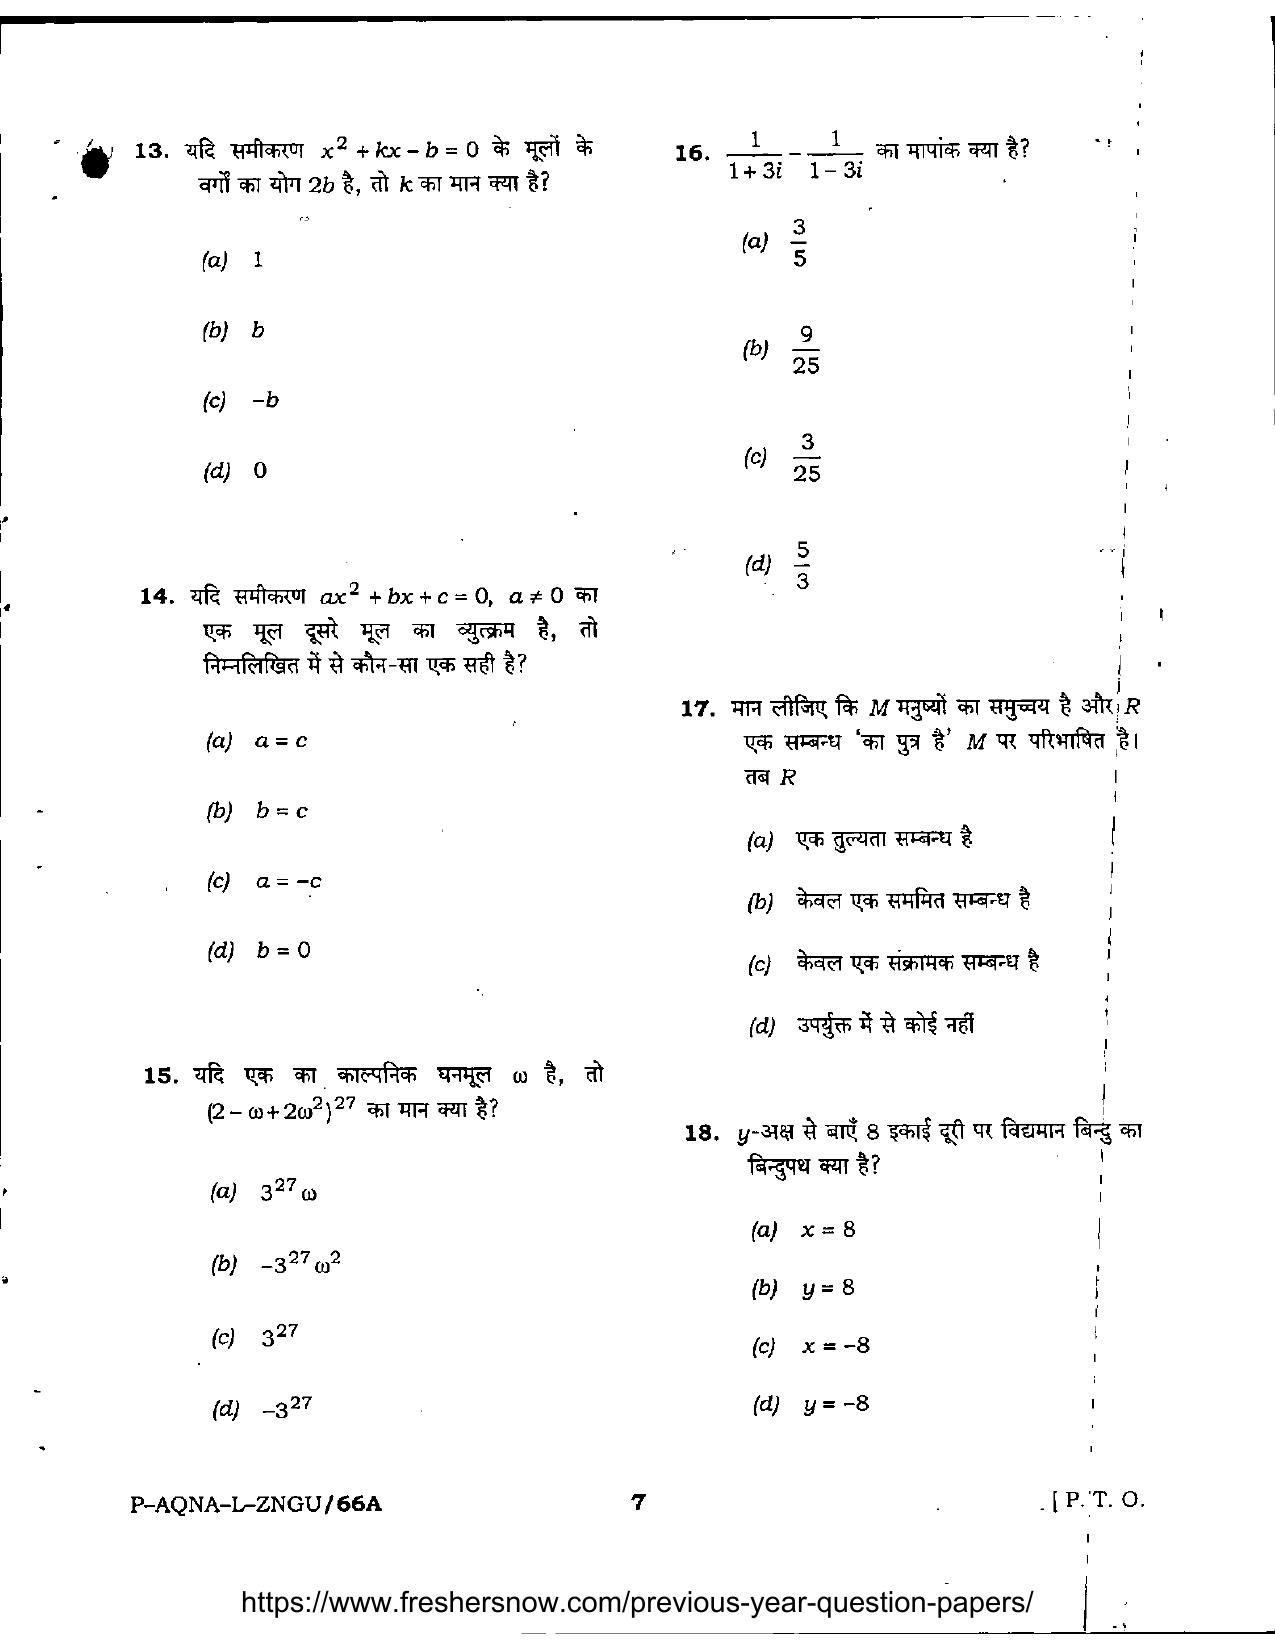 Jammu Kashmir Accounts Assistant Previous Papers for Mathematics - Page 7